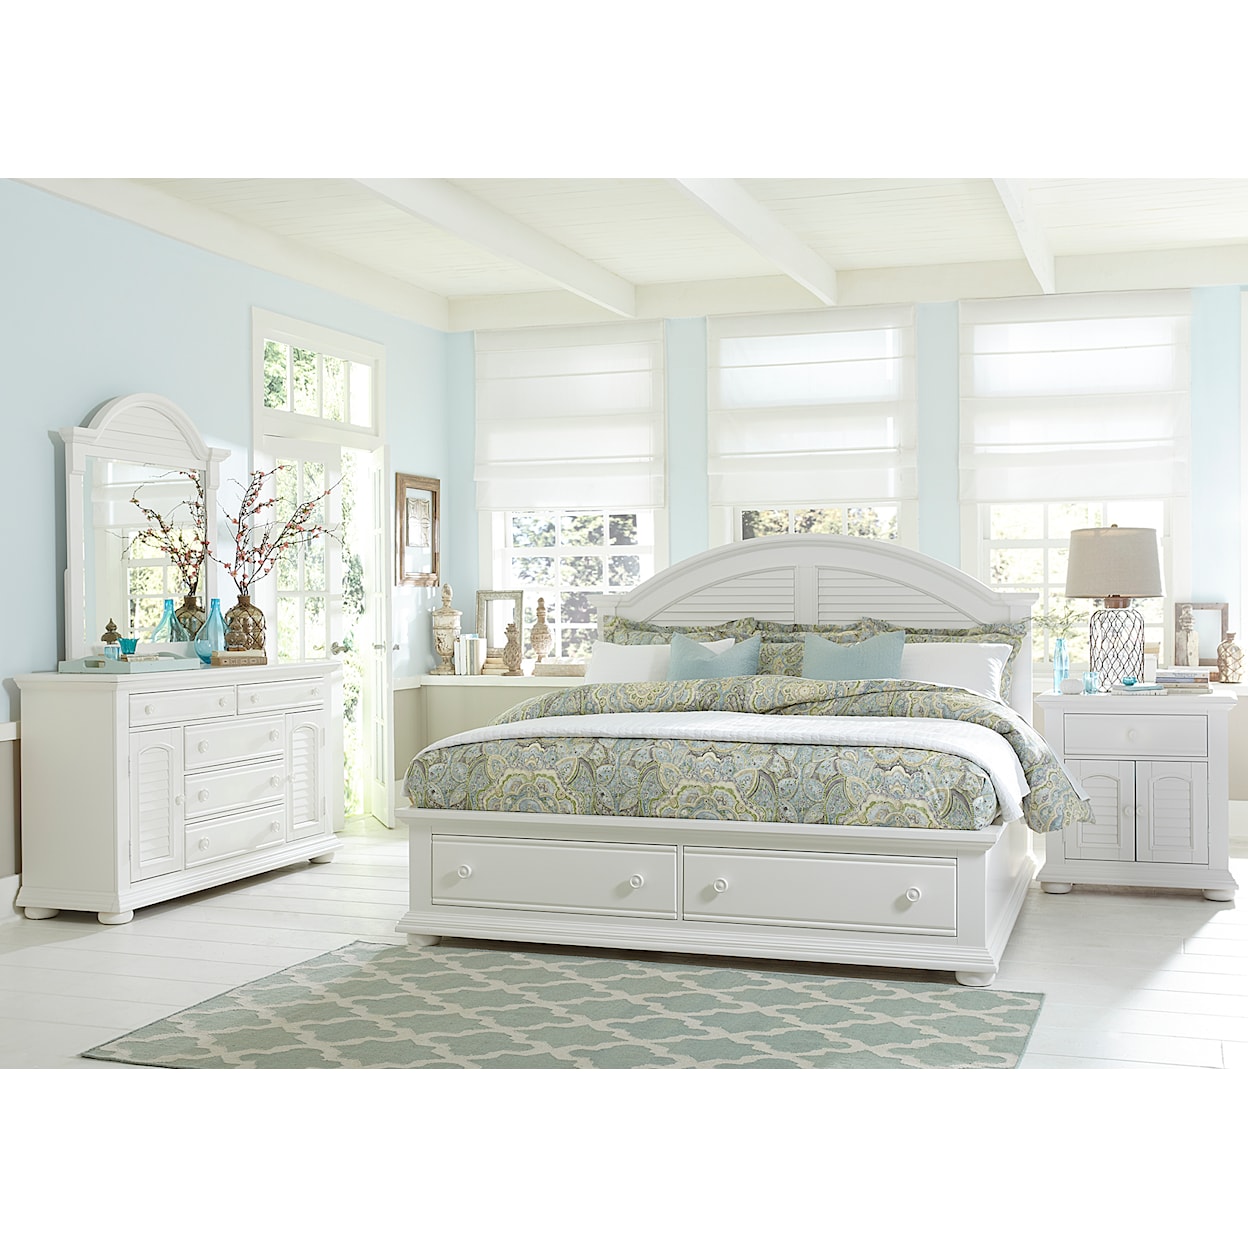 Libby Summer House 4-Piece King Storage Bedroom Group